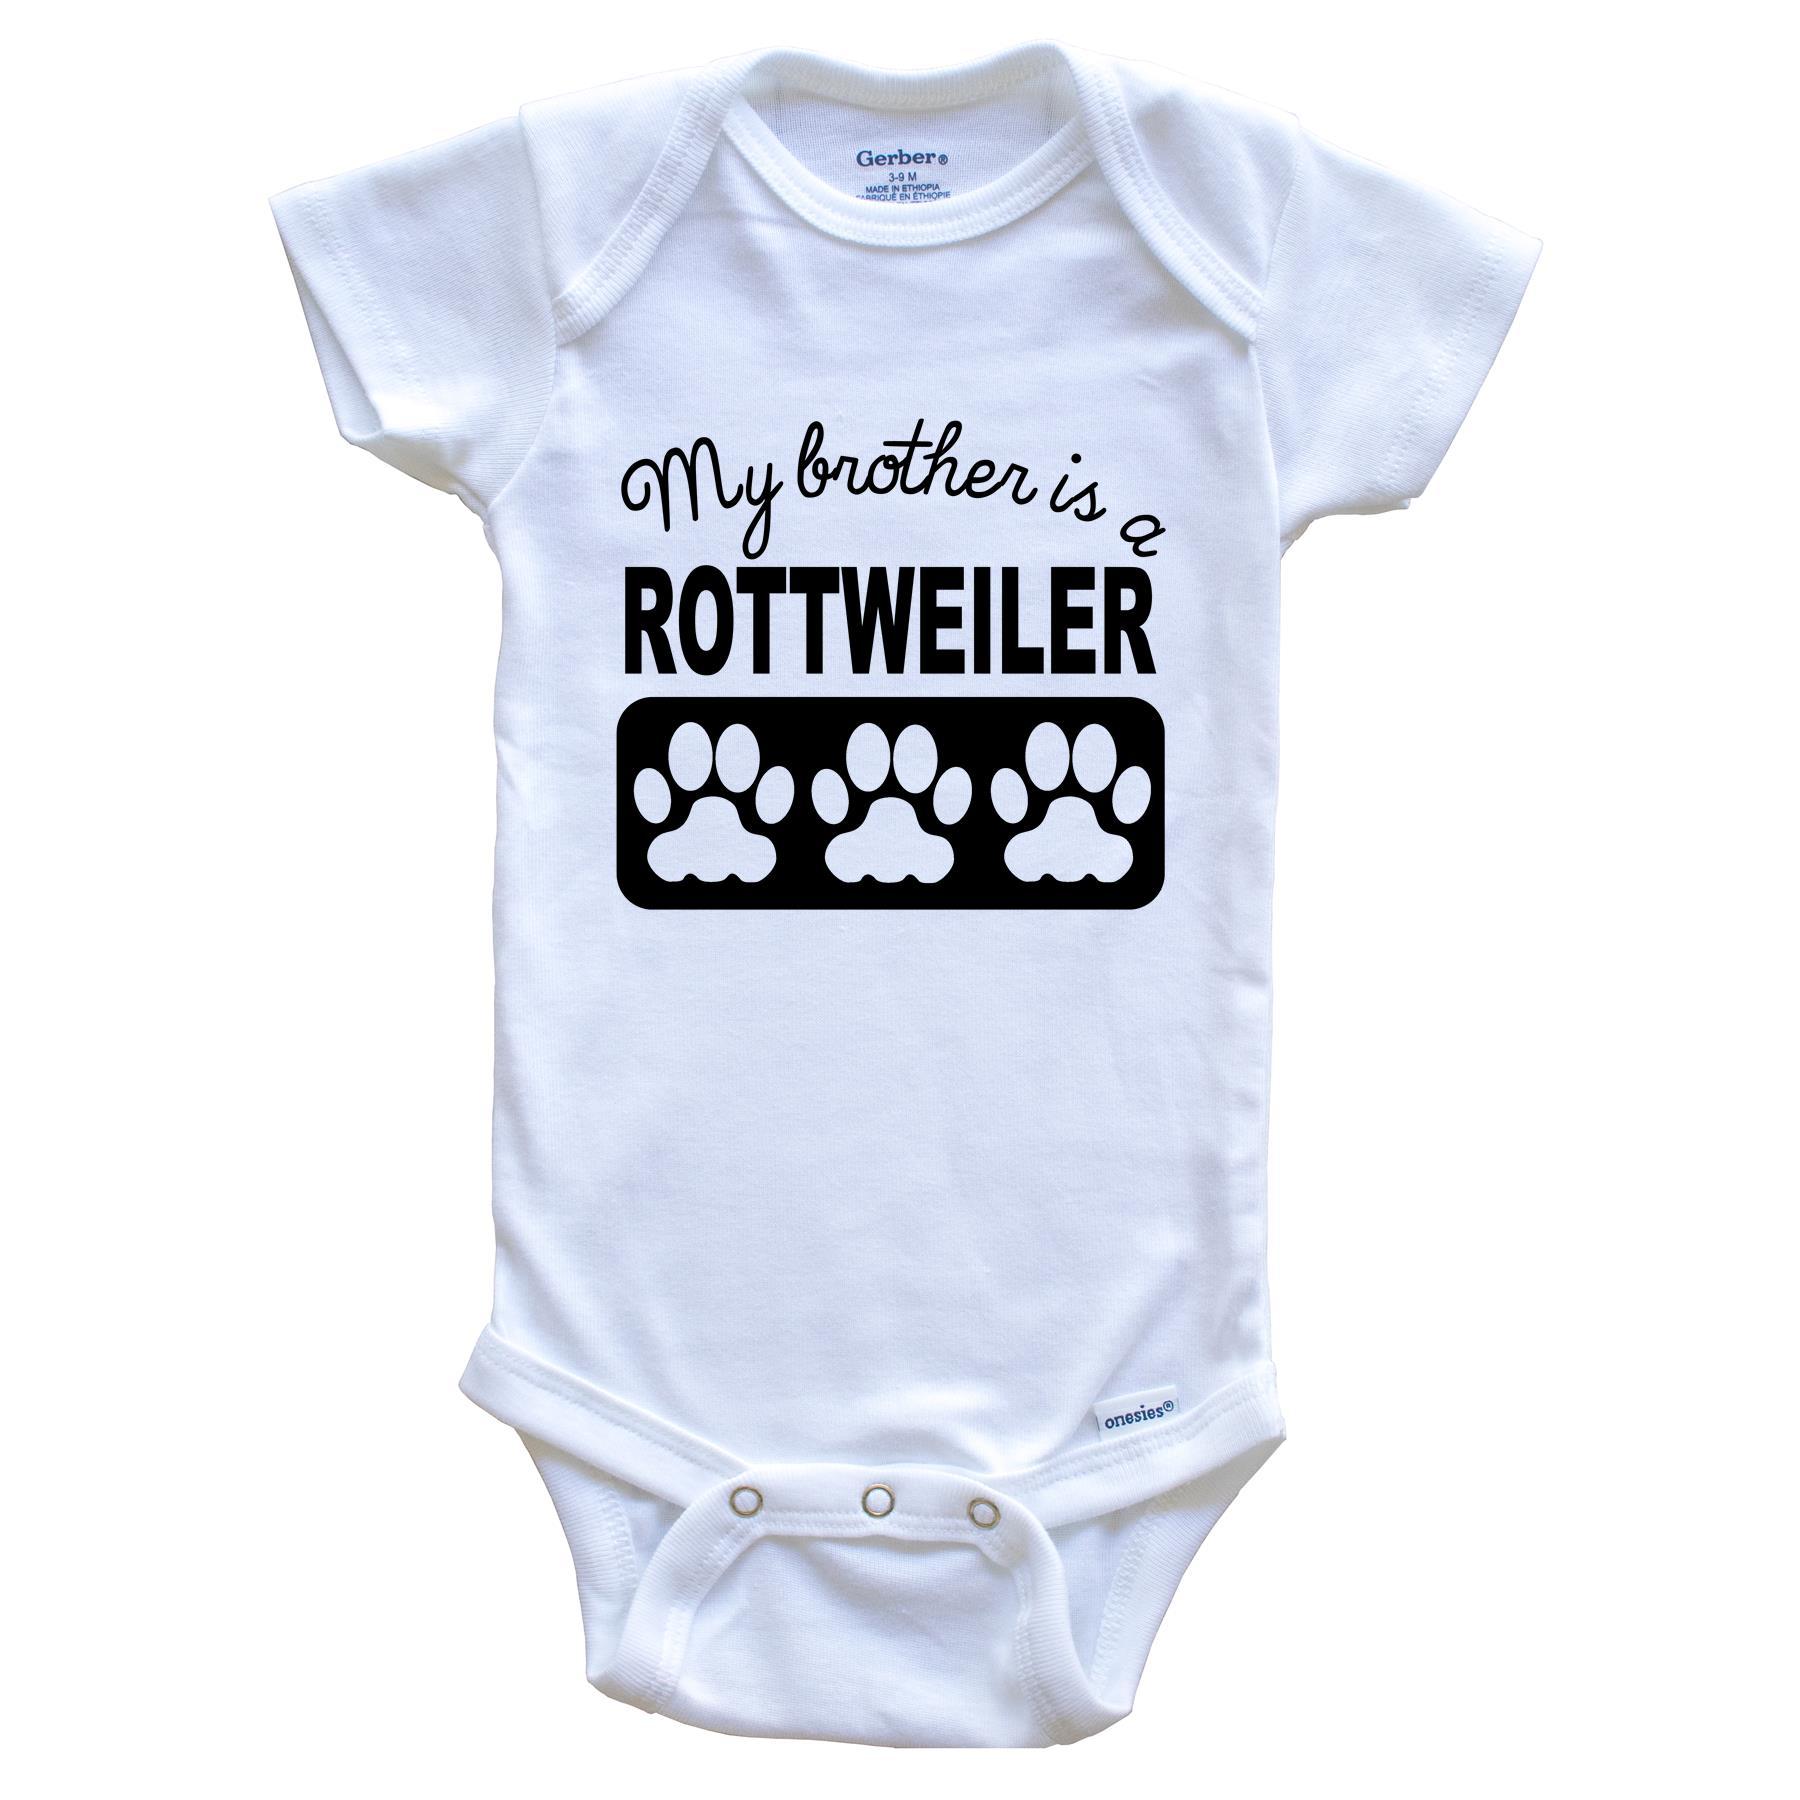 My Brother Is A Rottweiler Baby Onesie